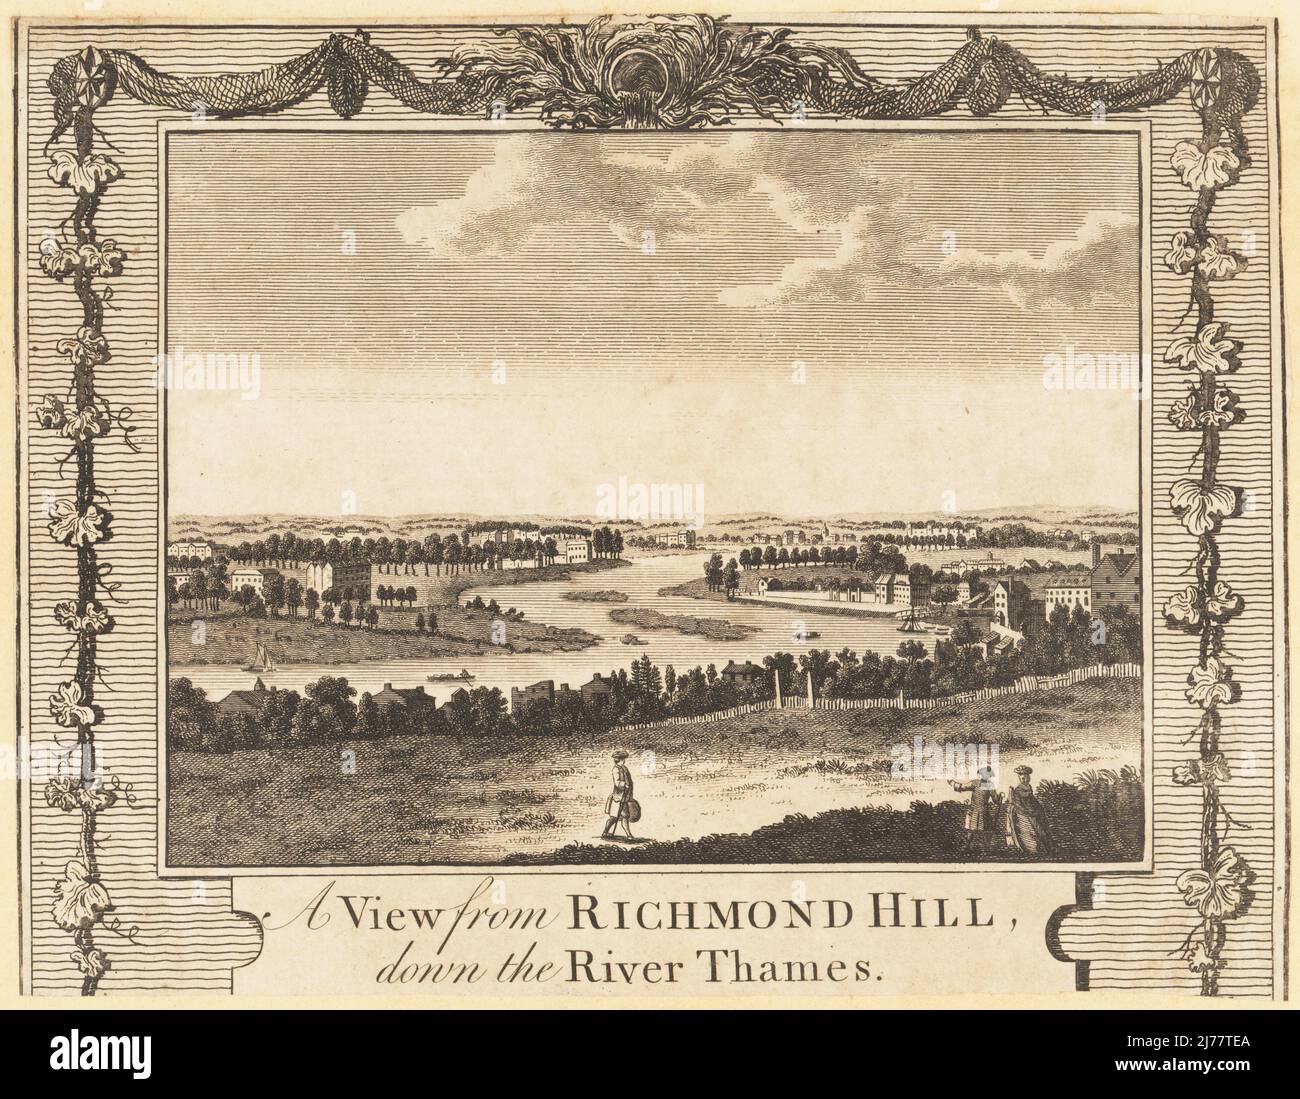 A view from Richmond Hill down the River Thames. Showing Richmond, Brentford, Isleworth, Syon House and Park, but lacking Richmond Bridge built in 1777. Copperplate engraving by William Thornton after a 1749 painting by Antonio Joli, London, 1784. Stock Photo